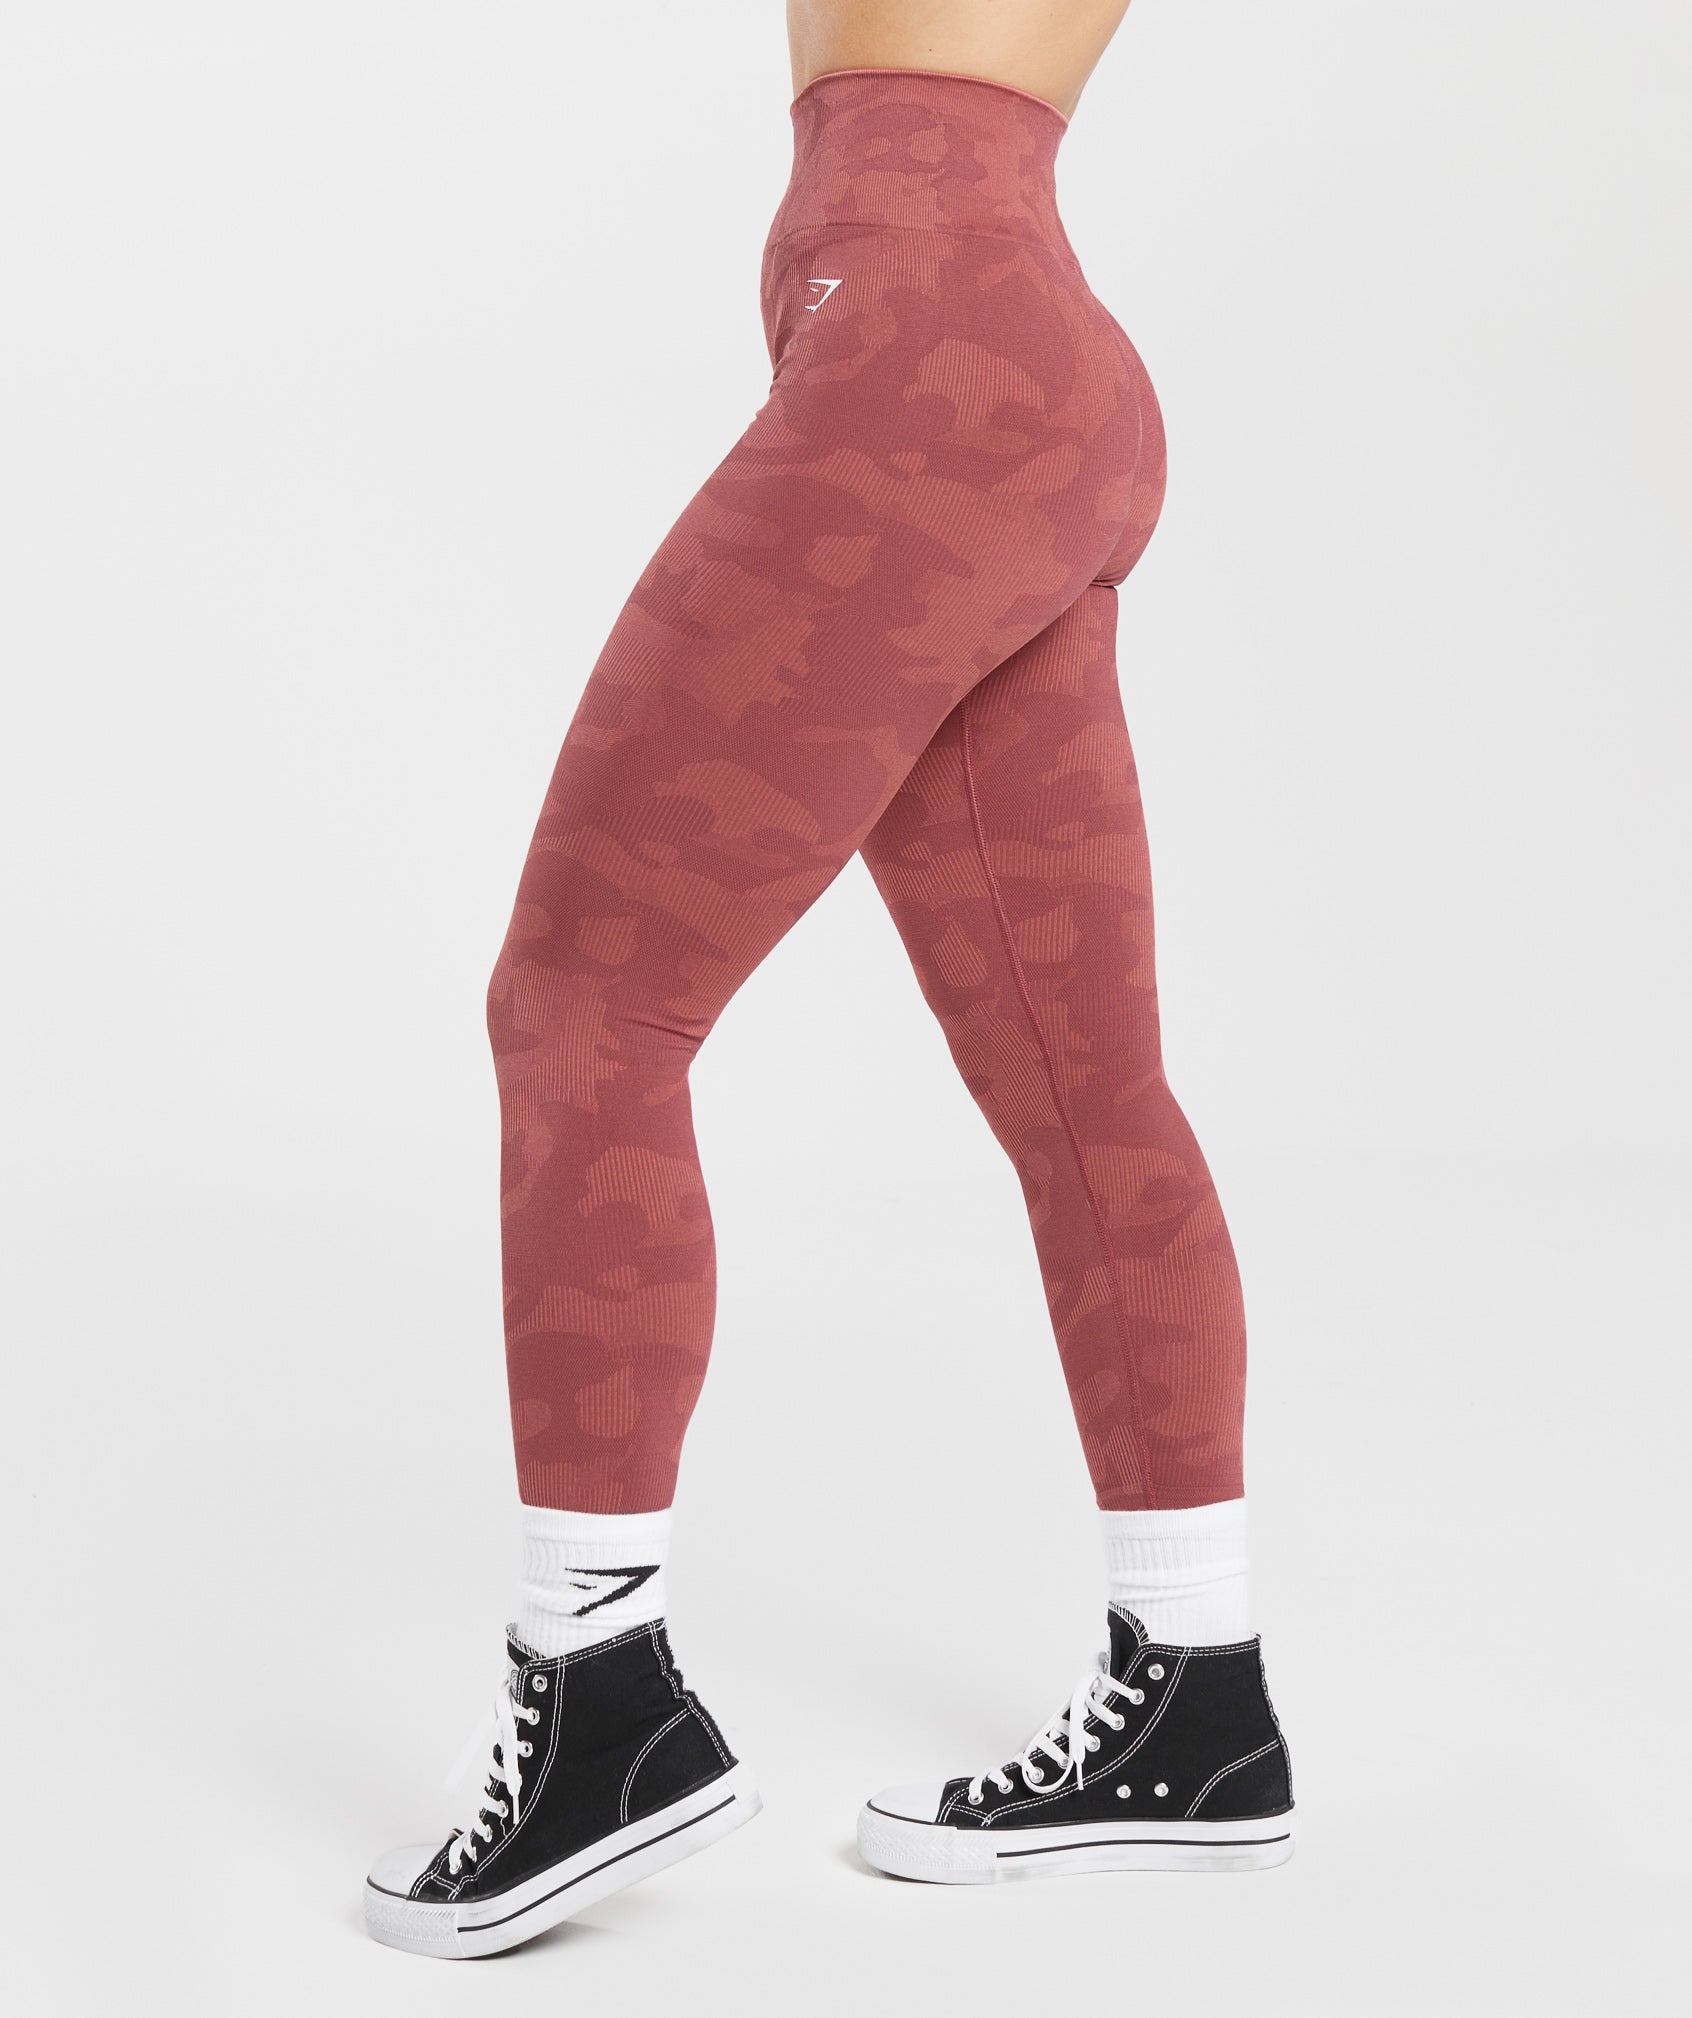 Adapt Camo Seamless Ribbed Leggings in Soft Berry/Sunbaked Pink - view 3